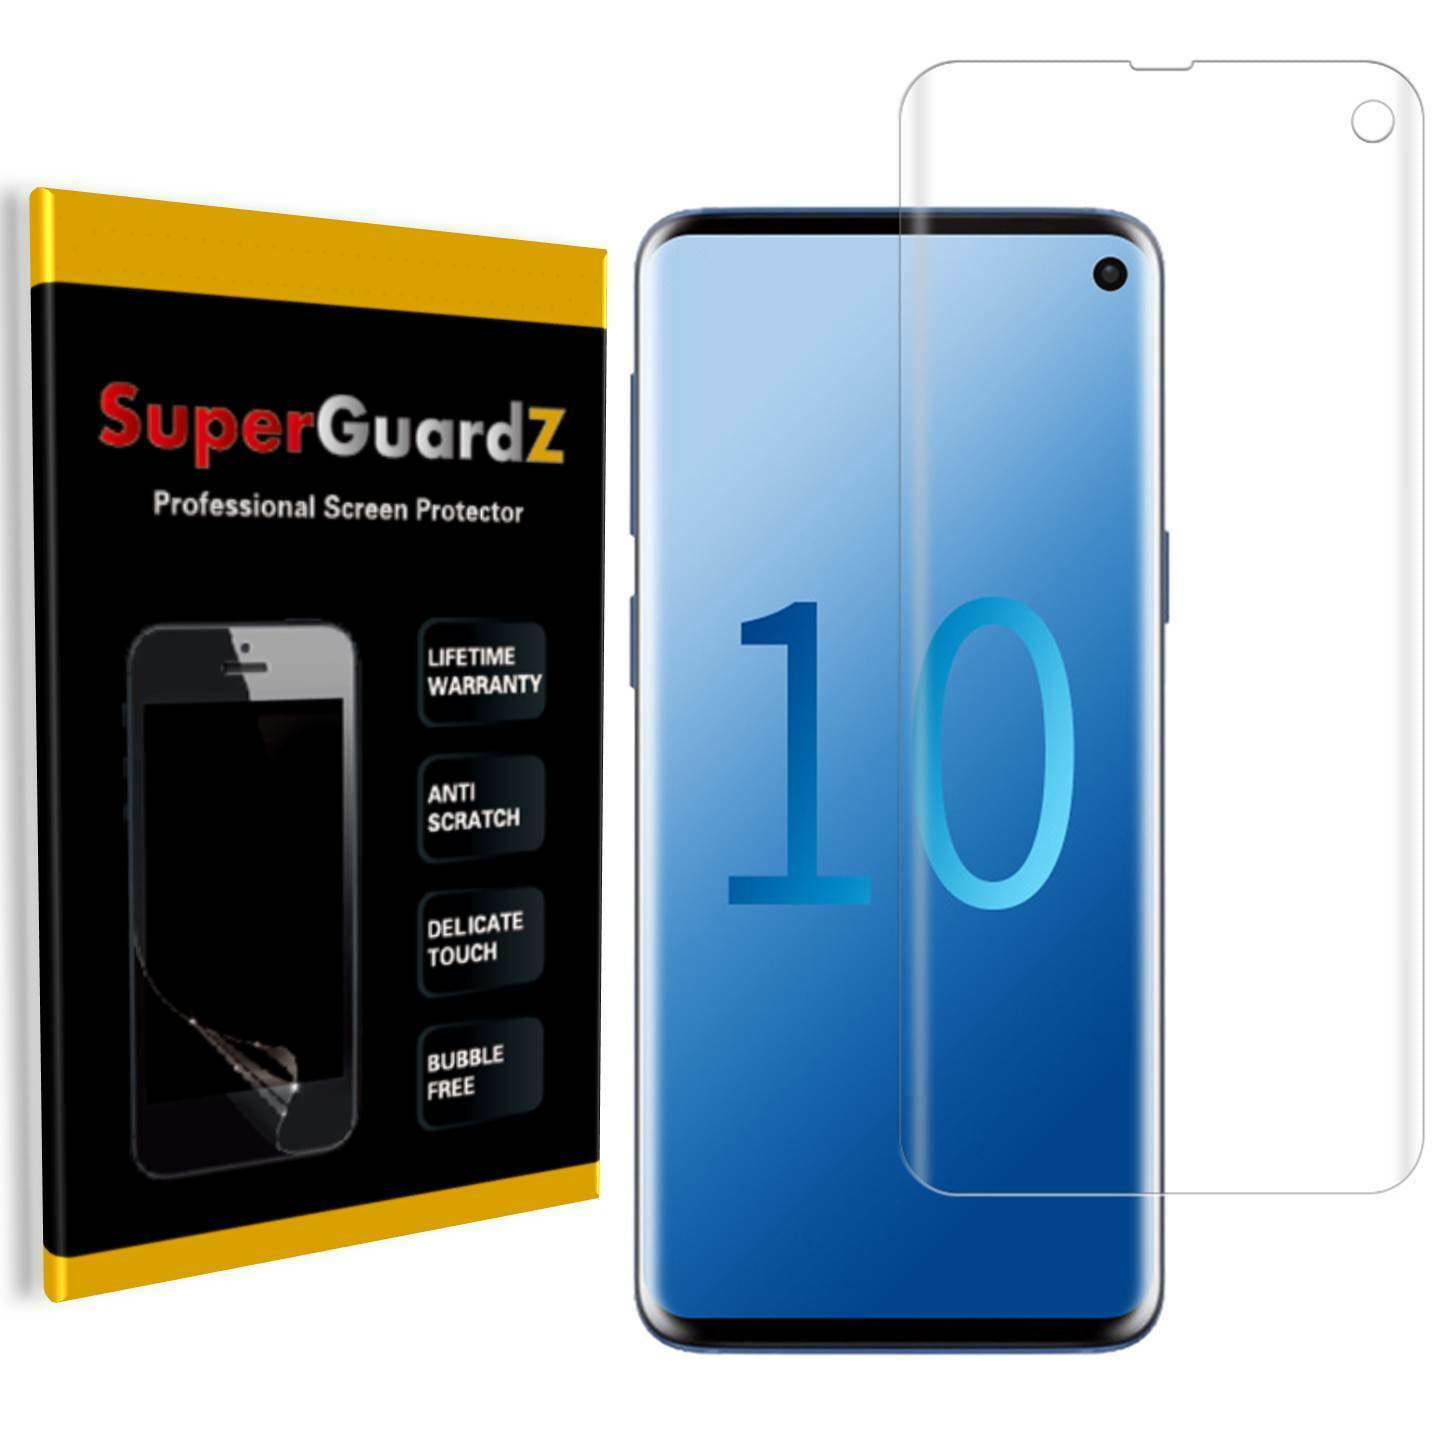 Scratch-Resistant Tempered Glass Film 3 Pack Screen Protector for Samsung Galaxy S10 Lite Case Friendly Shatterproof Conber Screen Protector for Samsung Galaxy S10 Lite